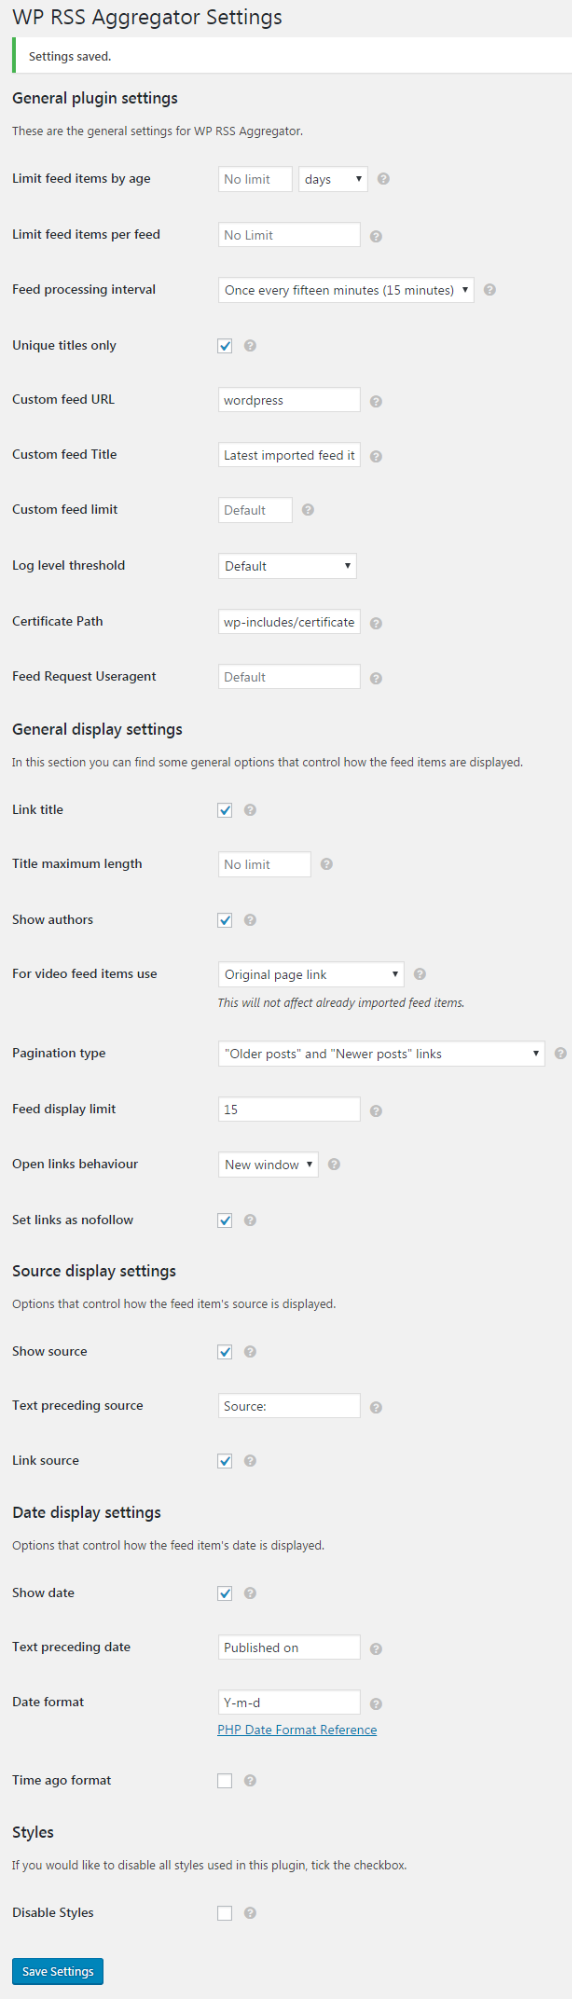 General Settings for WP RSS Aggregator